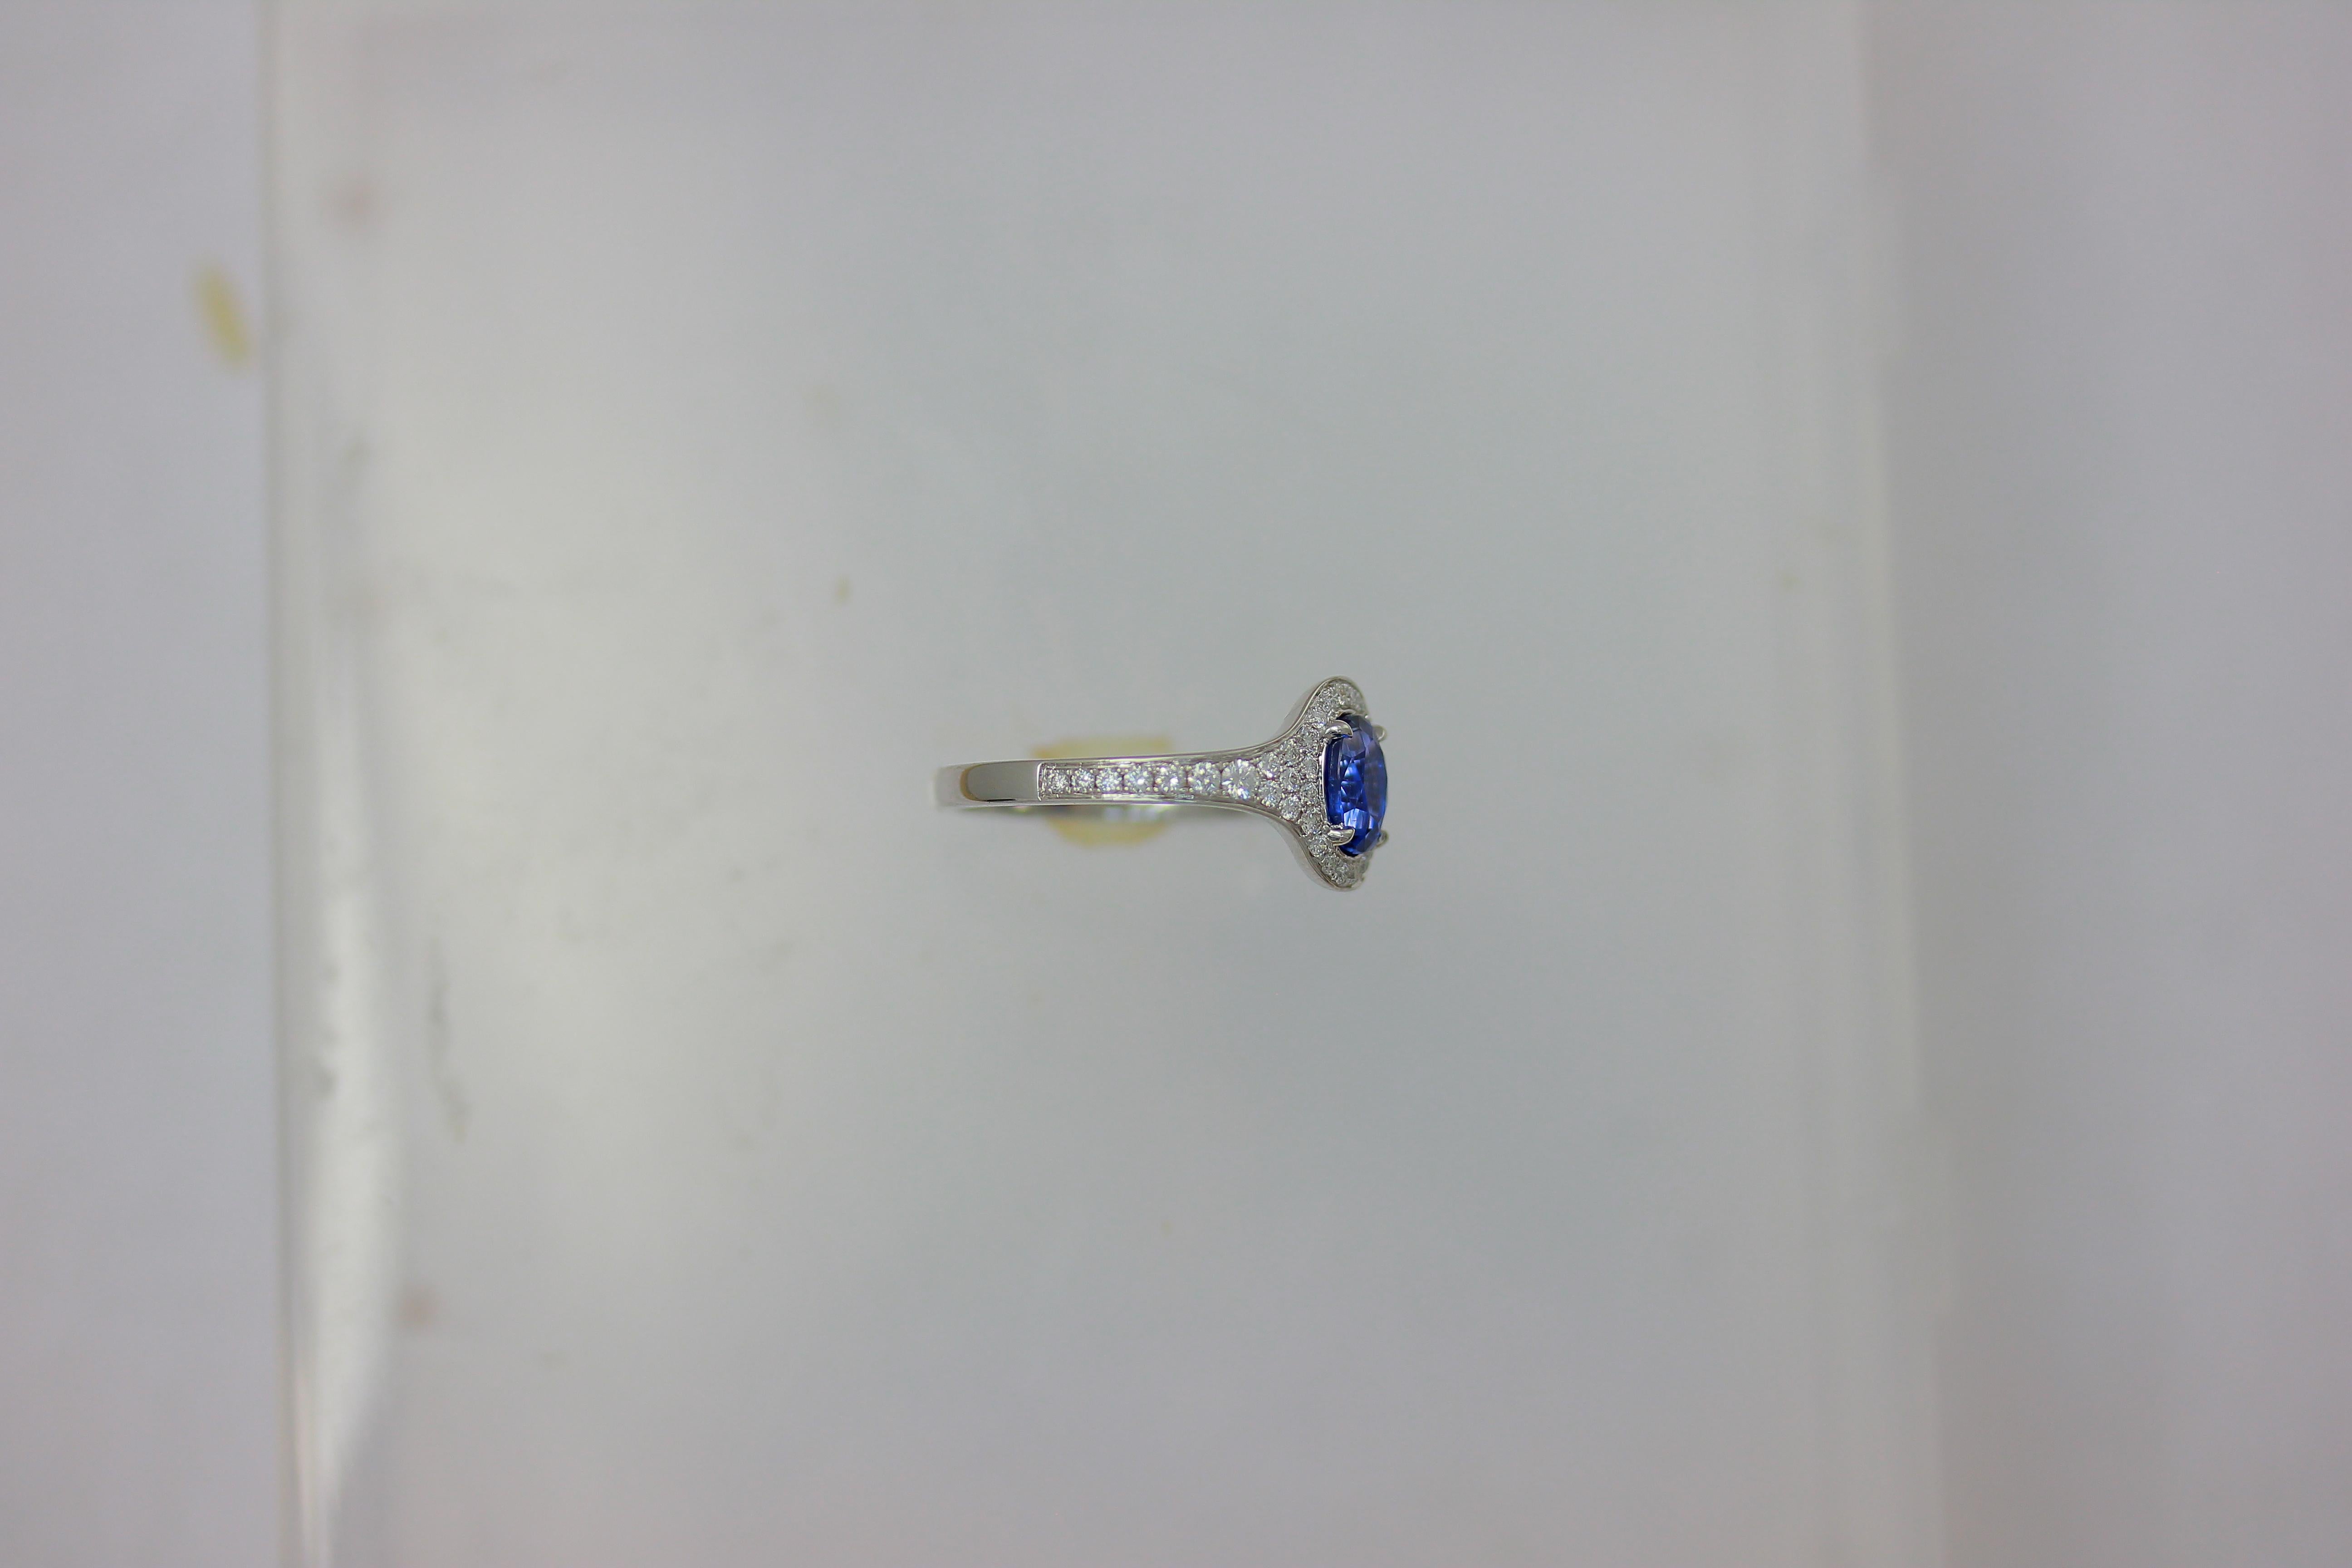 14K White Gold Sapphire Center White Diamond Top and Shank One of Kind Ring

Center Sapphire weight: 1.42 ct
Total diamond count: 44
Total diamond weight: 0.44 CT